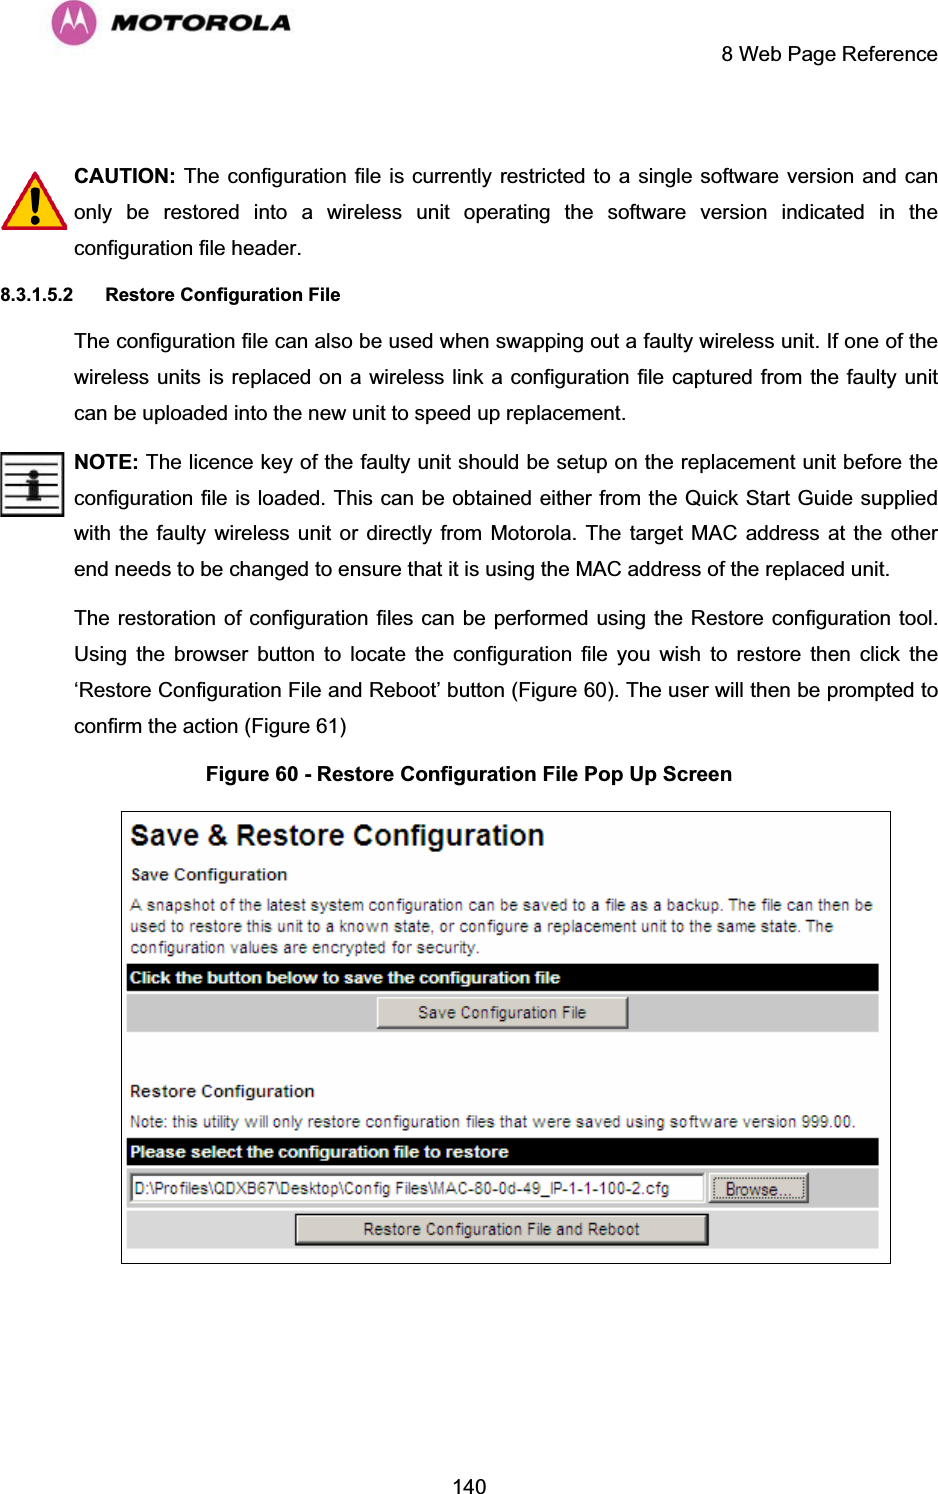     8 Web Page Reference  140 CAUTION: The configuration file is currently restricted to a single software version and can only be restored into a wireless unit operating the software version indicated in the configuration file header. 8.3.1.5.2 Restore Configuration File The configuration file can also be used when swapping out a faulty wireless unit. If one of the wireless units is replaced on a wireless link a configuration file captured from the faulty unit can be uploaded into the new unit to speed up replacement.  NOTE: The licence key of the faulty unit should be setup on the replacement unit before the configuration file is loaded. This can be obtained either from the Quick Start Guide supplied with the faulty wireless unit or directly from Motorola. The target MAC address at the other end needs to be changed to ensure that it is using the MAC address of the replaced unit. The restoration of configuration files can be performed using the Restore configuration tool. Using the browser button to locate the configuration file you wish to restore then click the ‘Restore Configuration File and Reboot’ button (Figure 60). The user will then be prompted to confirm the action (Figure 61) Figure 60 - Restore Configuration File Pop Up Screen  